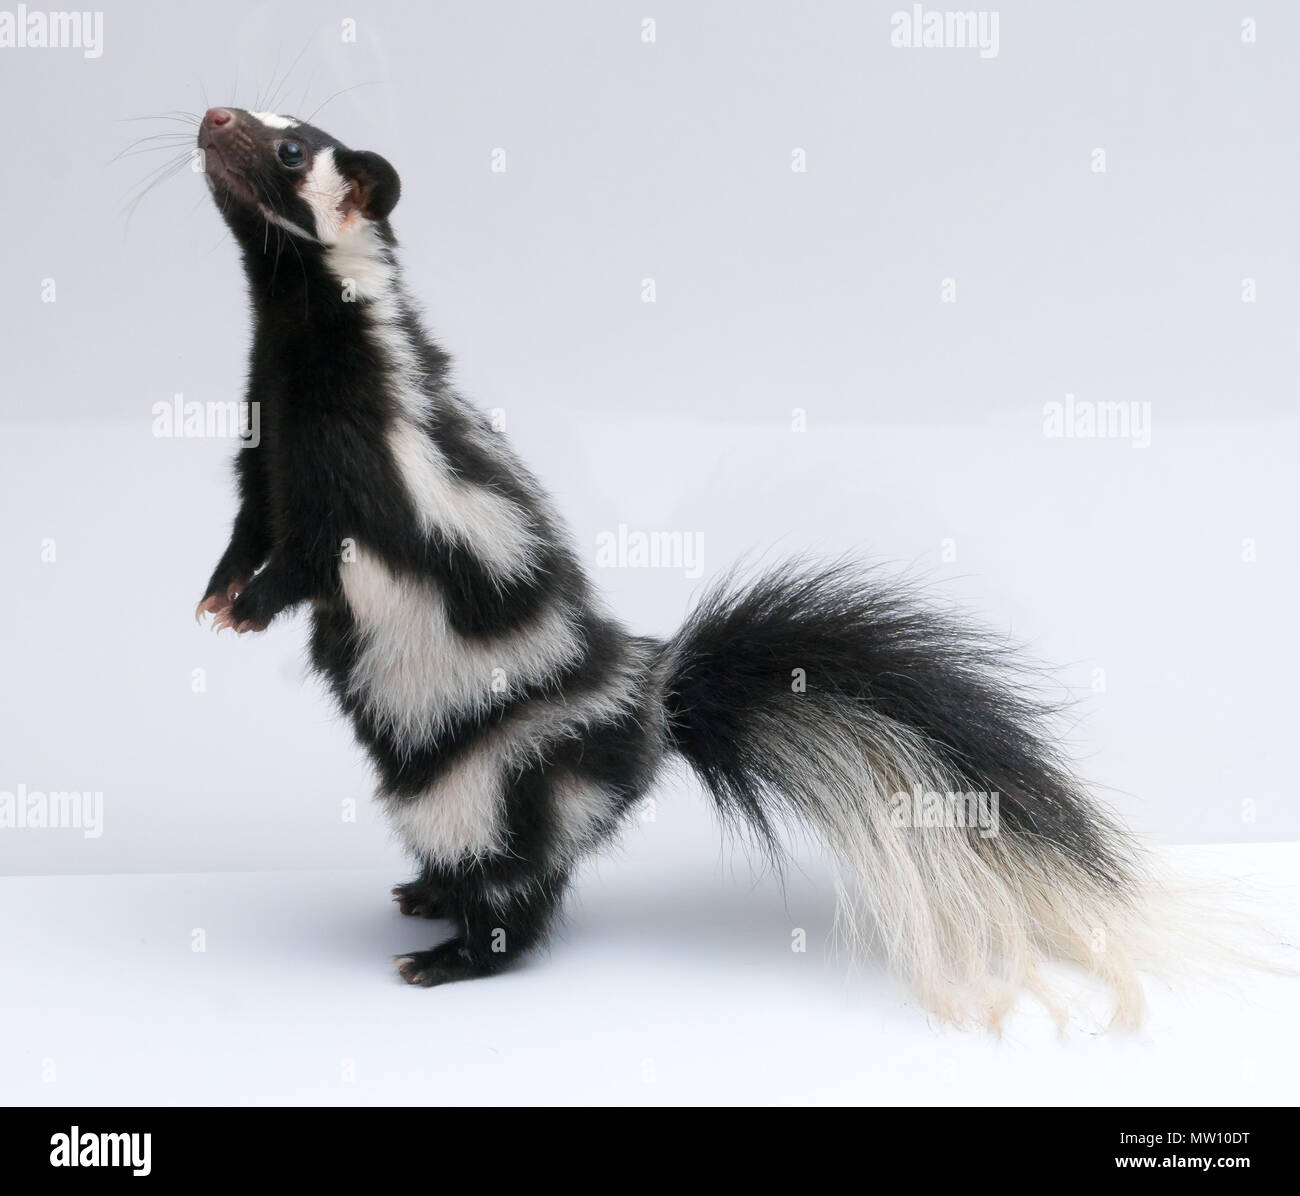 Spotted Skunk, Standing Up on White Background Stock Photo